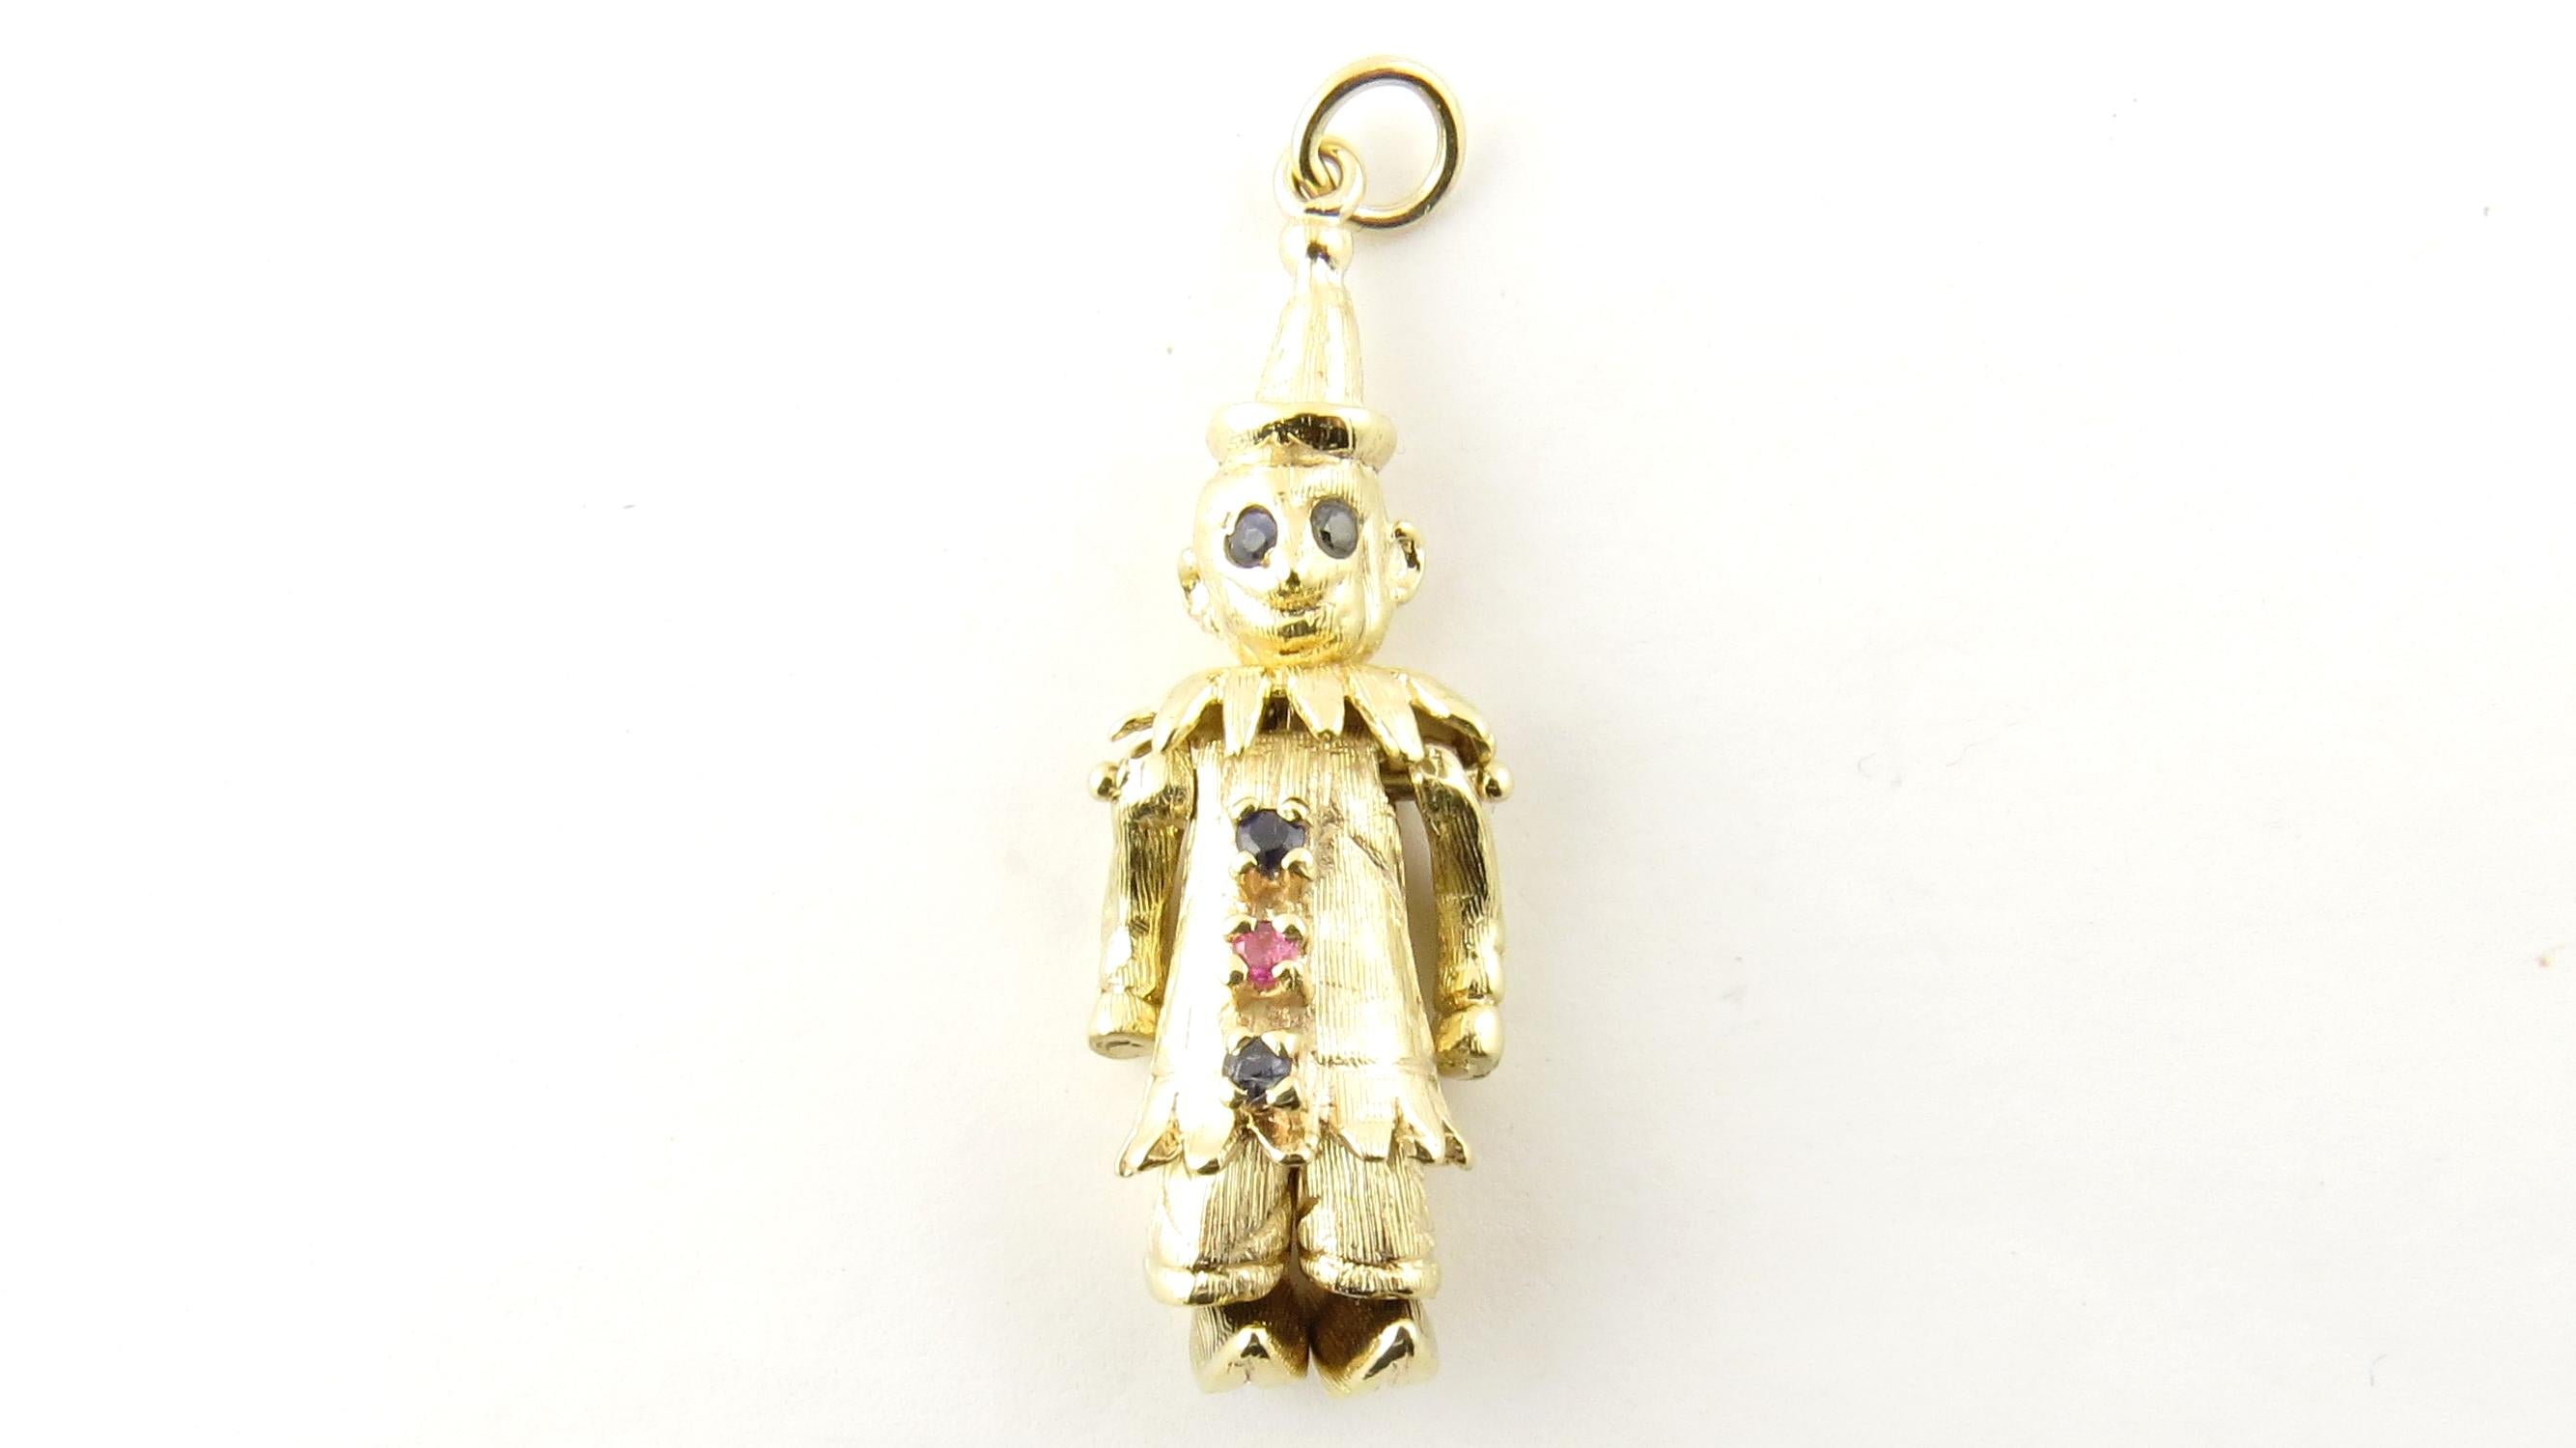 Vintage 14 Karat Yellow Gold Sapphire, Pearl and Ruby Articulated Clown Pendant.

This lovely pendant features an articulated clown accented with four sapphires, two pearls and one ruby set in meticulously detailed 14K yellow gold.

Size: 35 mm x 10